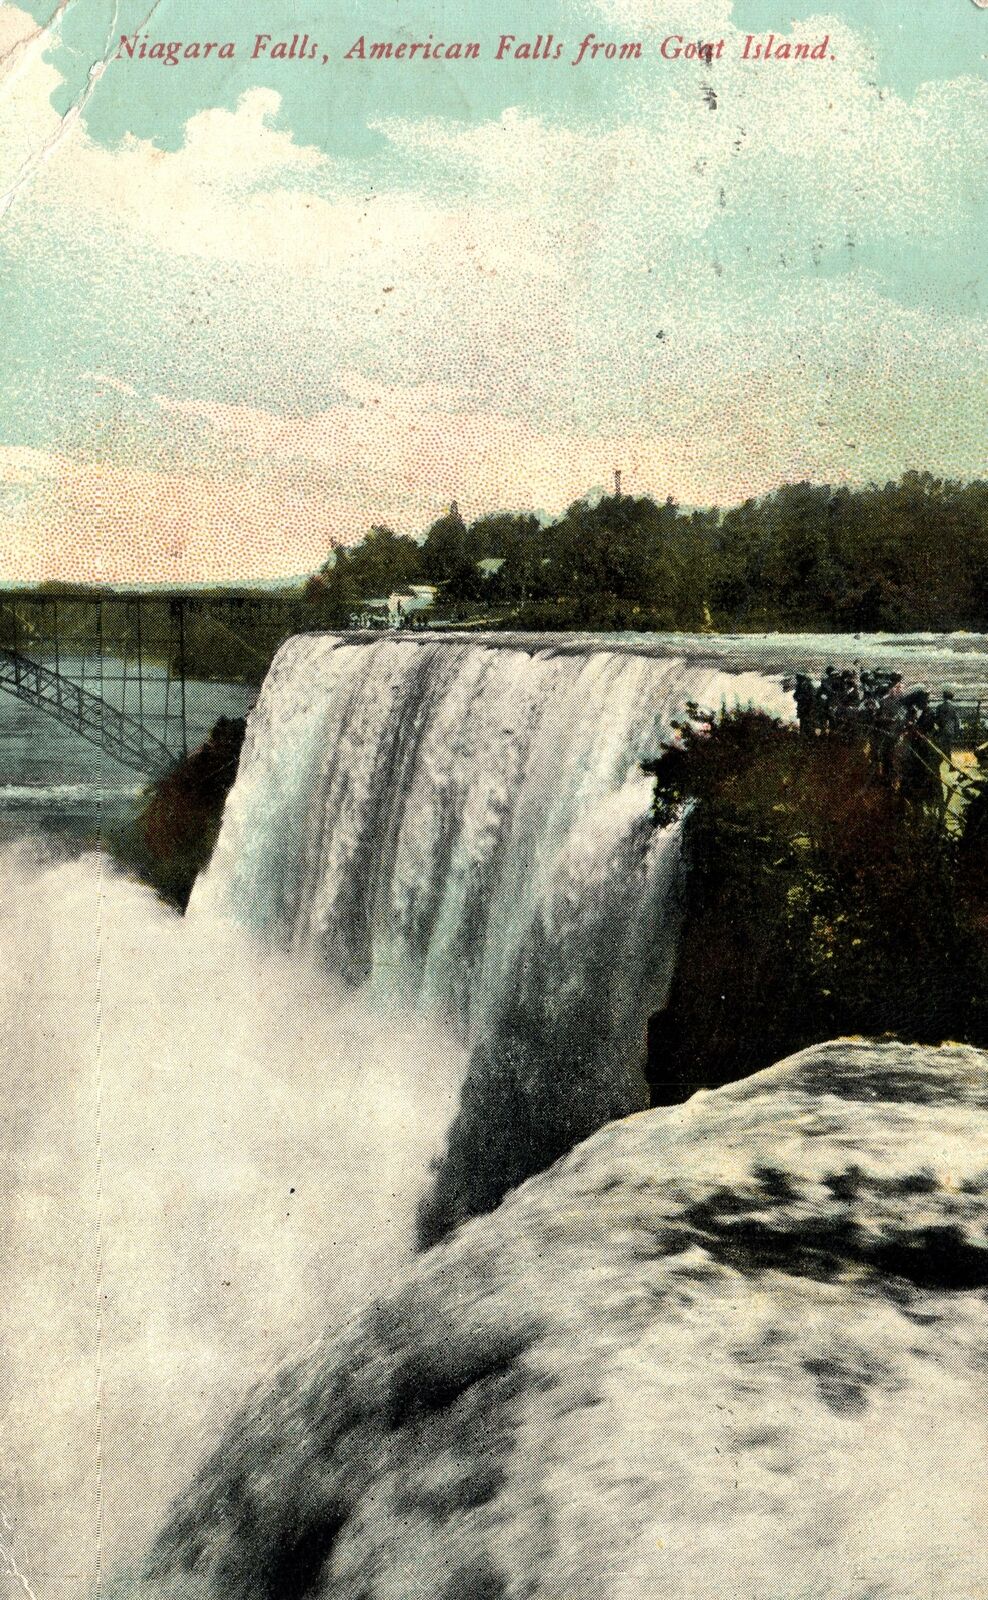 VINTAGE POSTCARD VIEW OF THE AMERICAN FALLS FROM GOAT ISLAND NIAGARA FALLS 1913